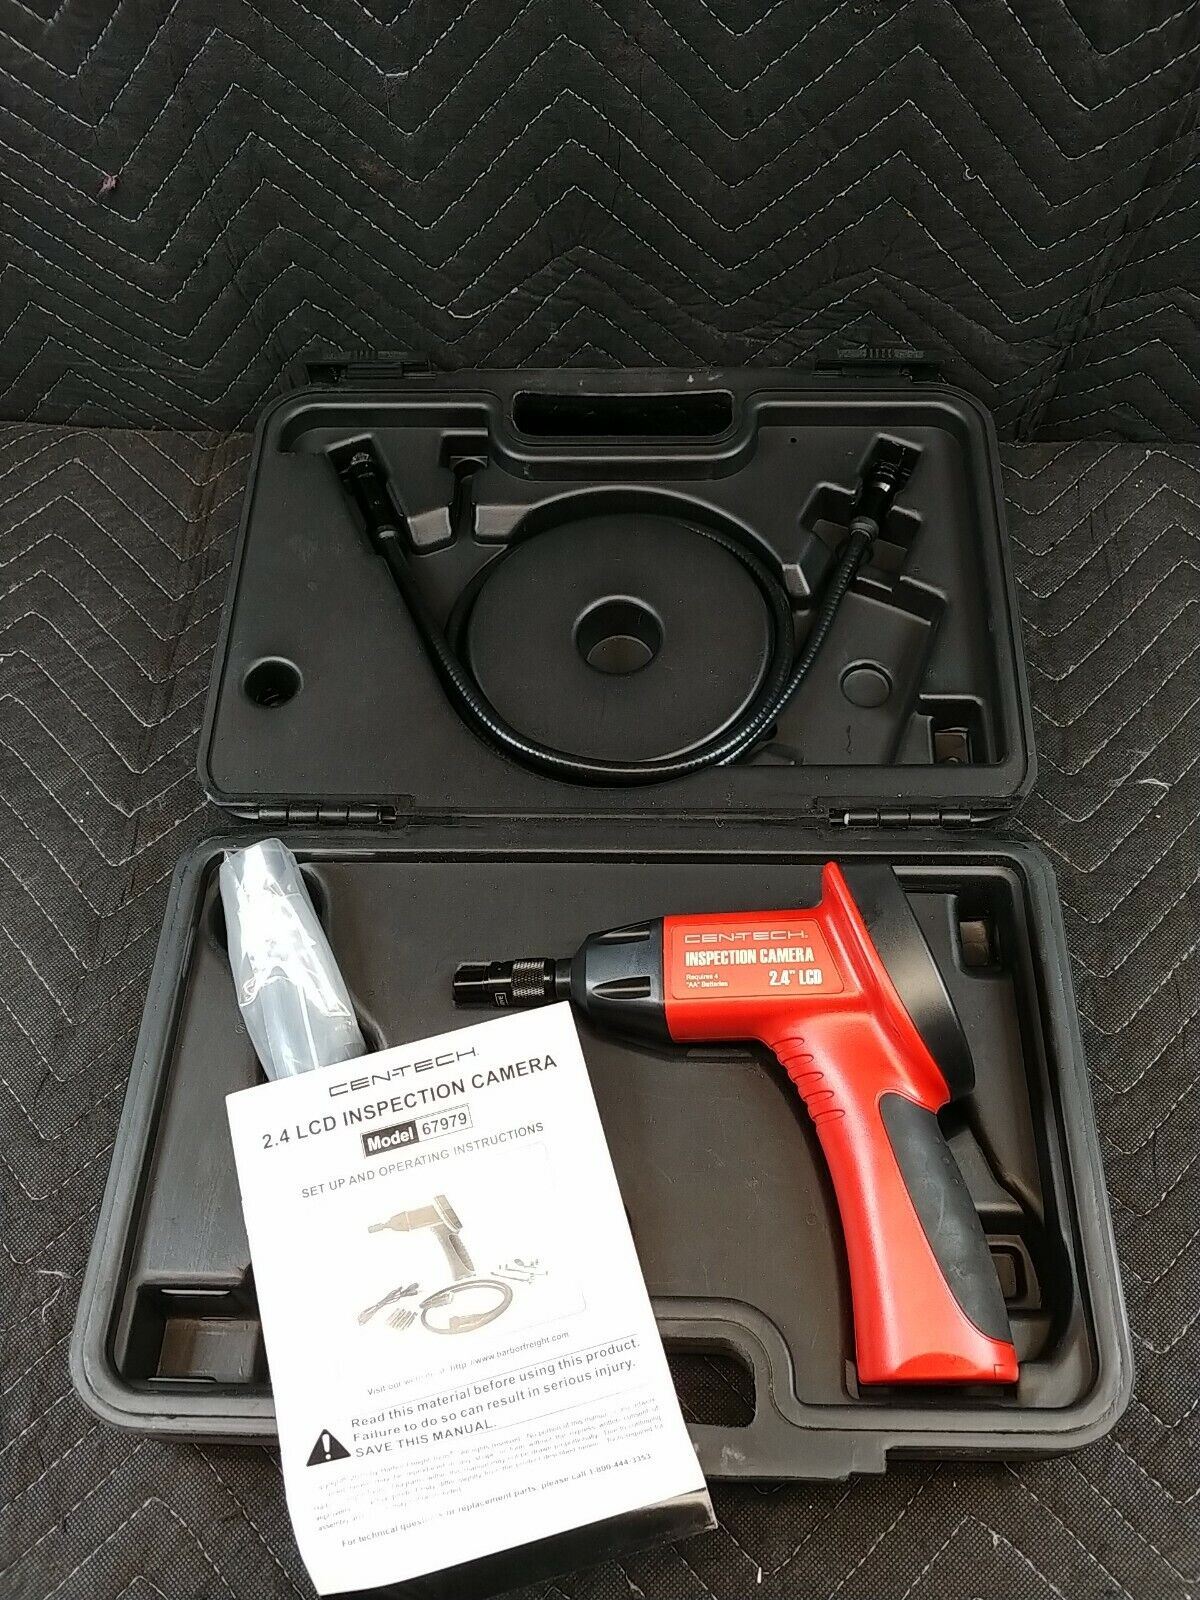 CEN-TECH 2.4 LCD inspection camera with cable and case